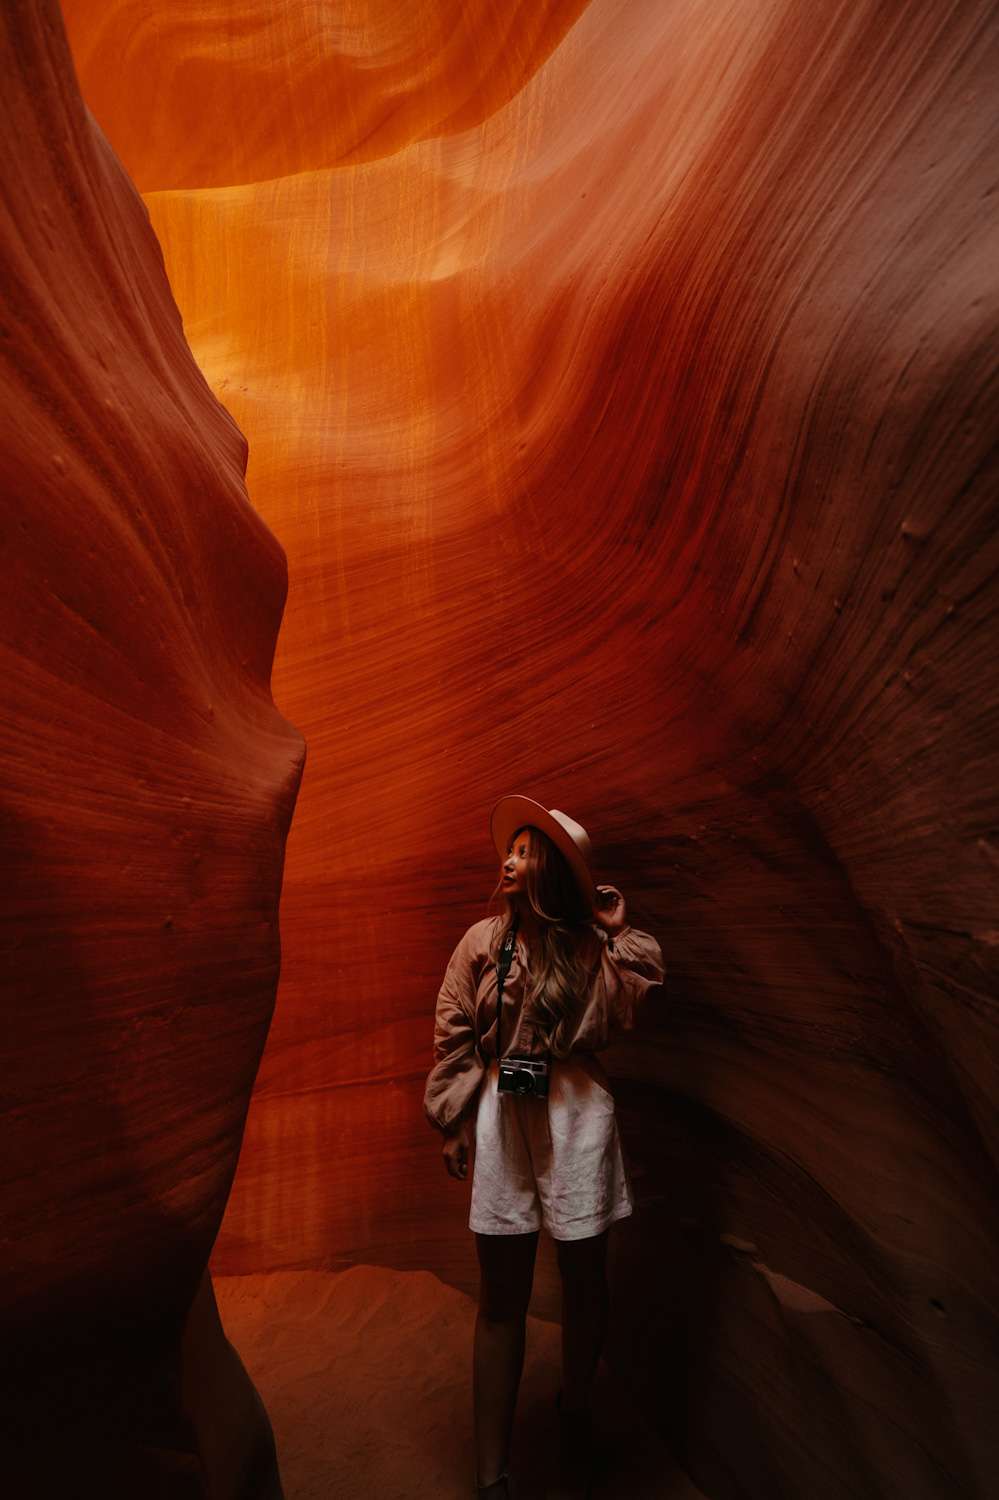 Coco Tran — Aesthetic Travel Blog By Film Photographer Coco Tran https://cocotran.com/best-time-to-visit-antelope-canyon/